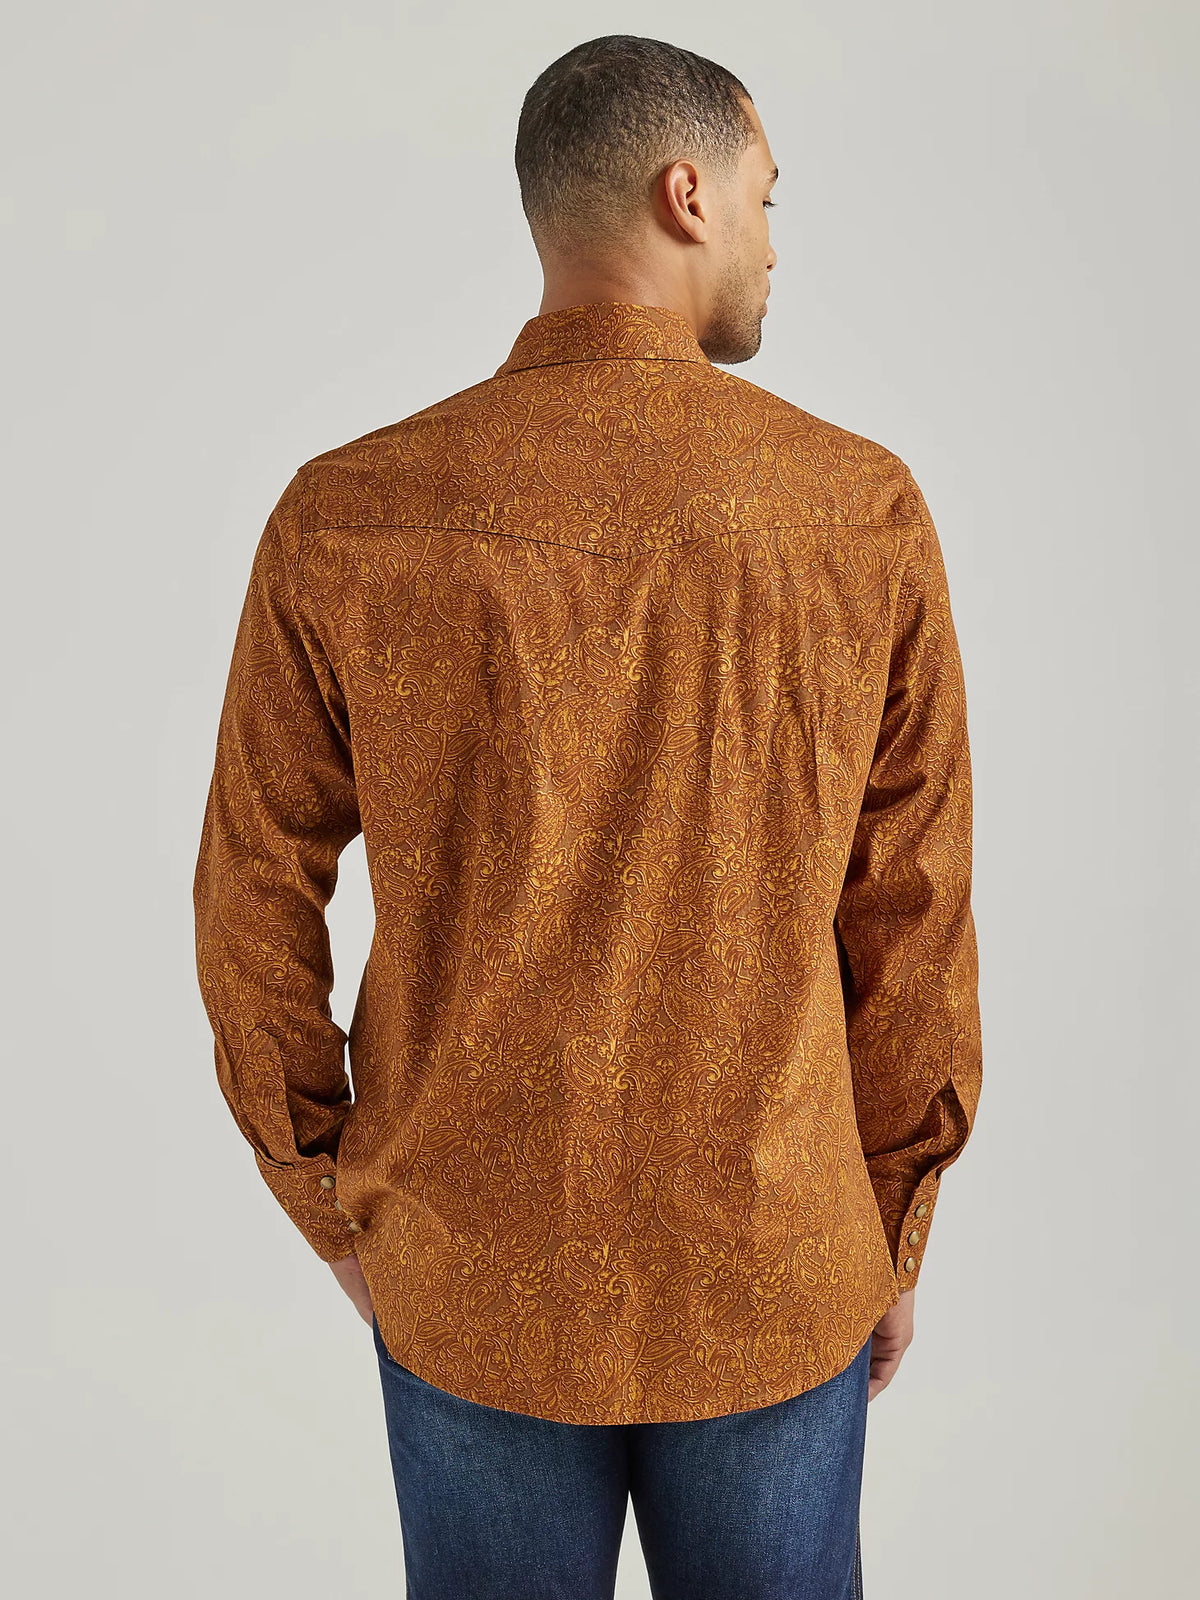 Wrangler Way Out West Men's Long Sleeve Western Snap Shirt in Raw Hide